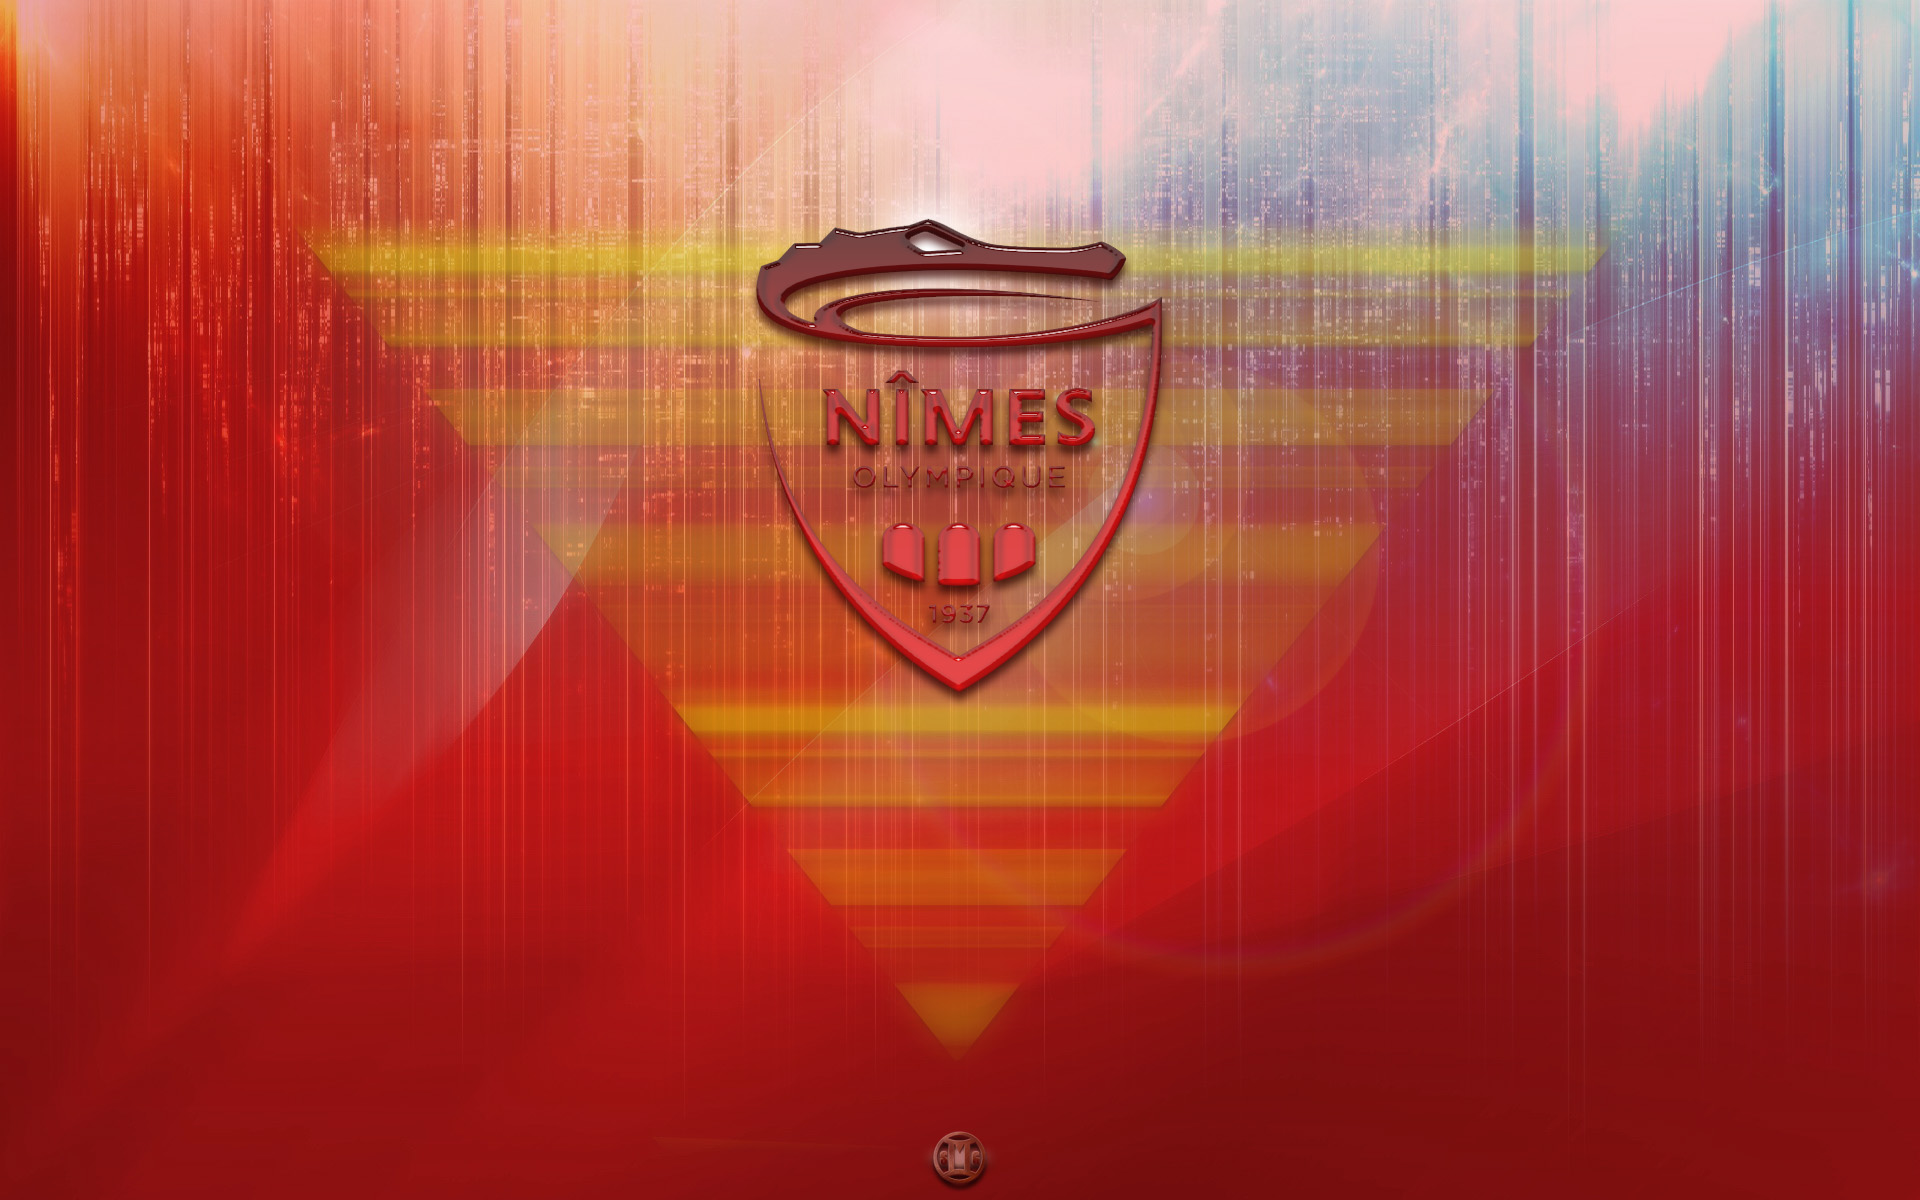 NiMes Olympique Wallpapers